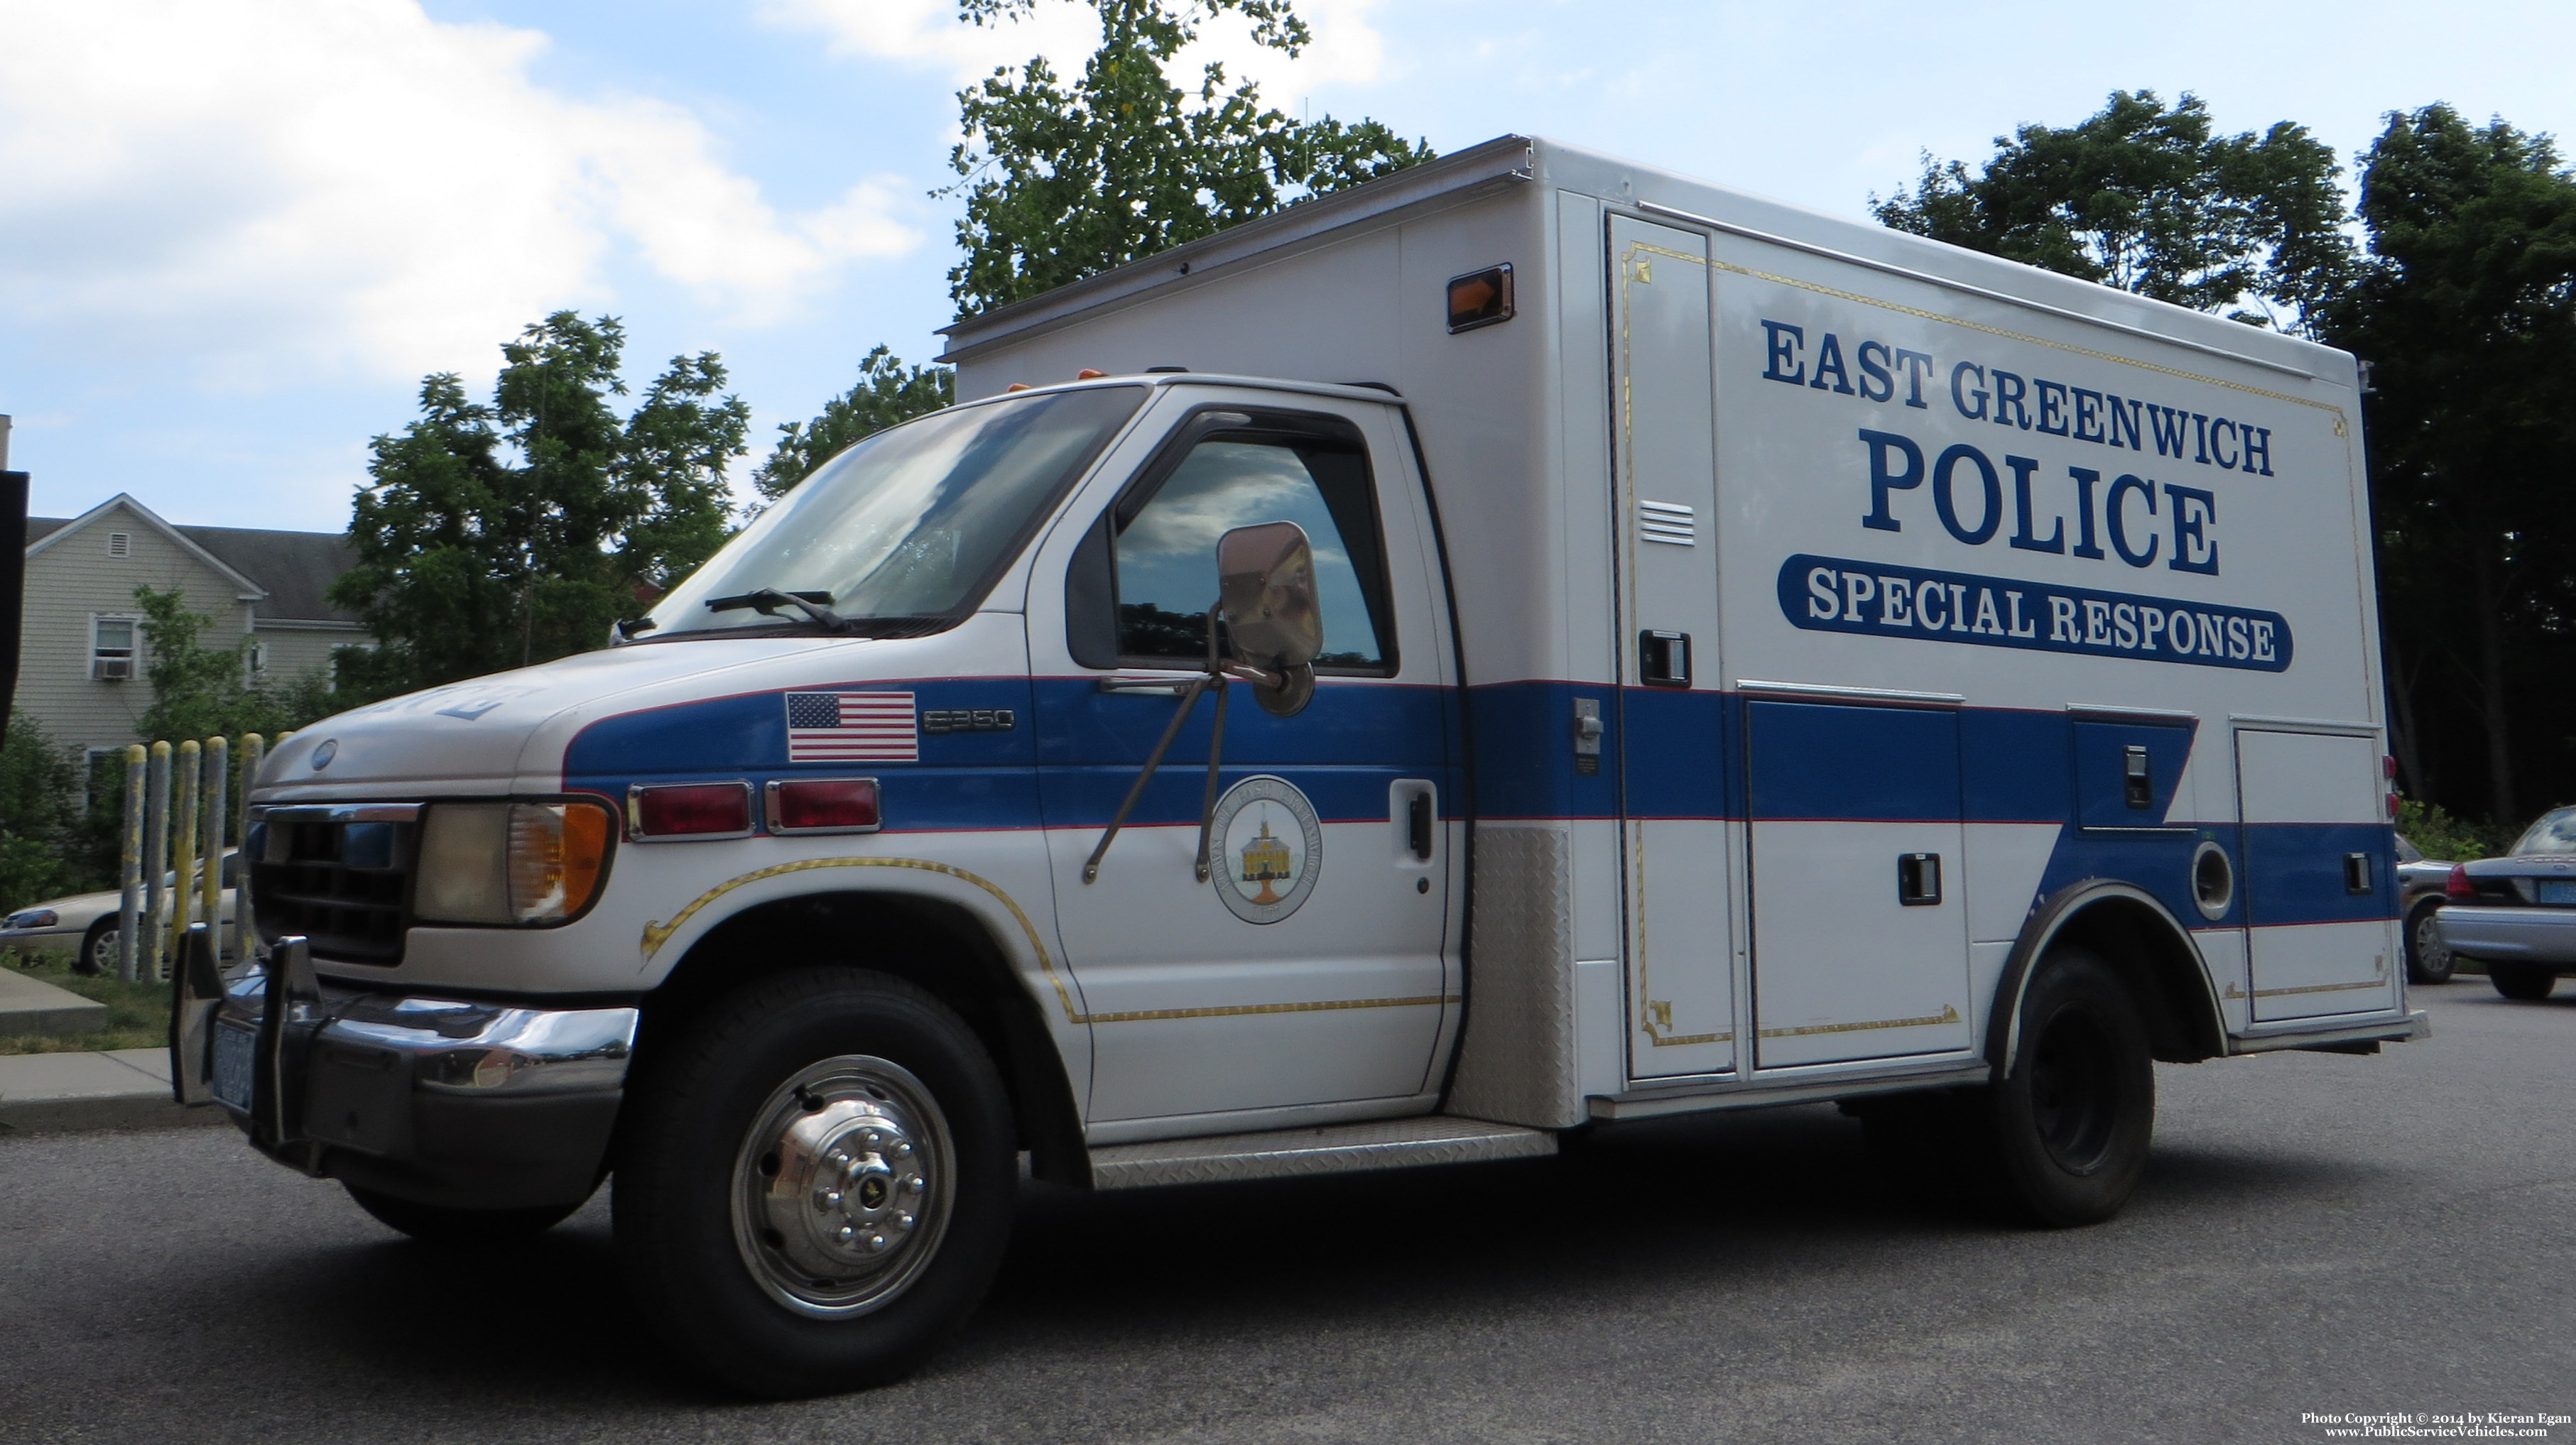 A photo  of East Greenwich Police
            Special Response Unit, a 1996-2006 Ford E-350             taken by Kieran Egan